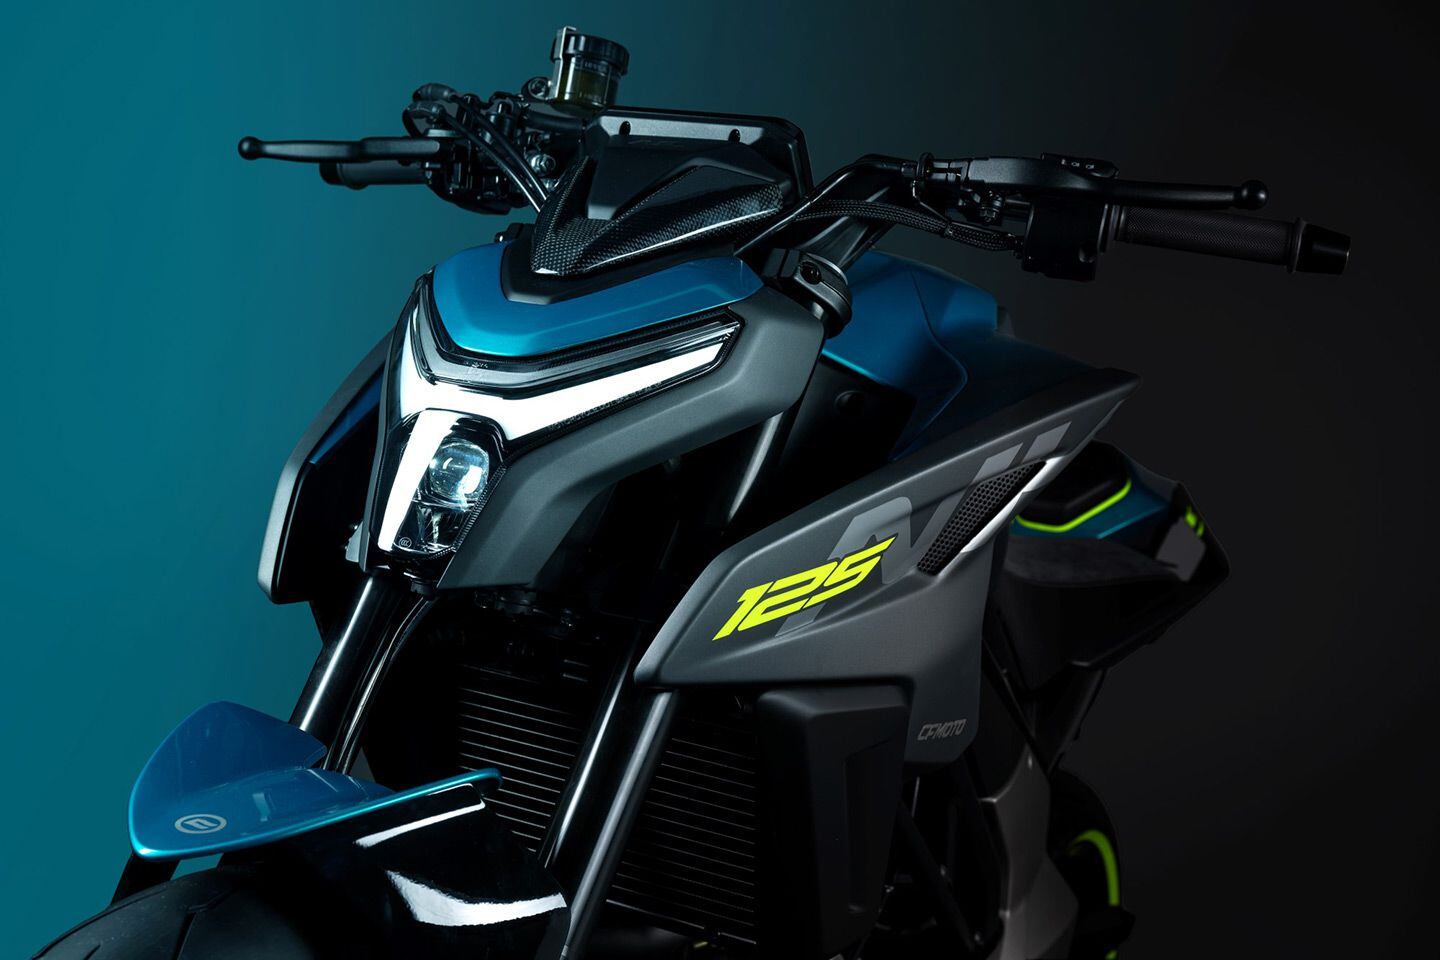 The CFMoto 125NK’s front nose.